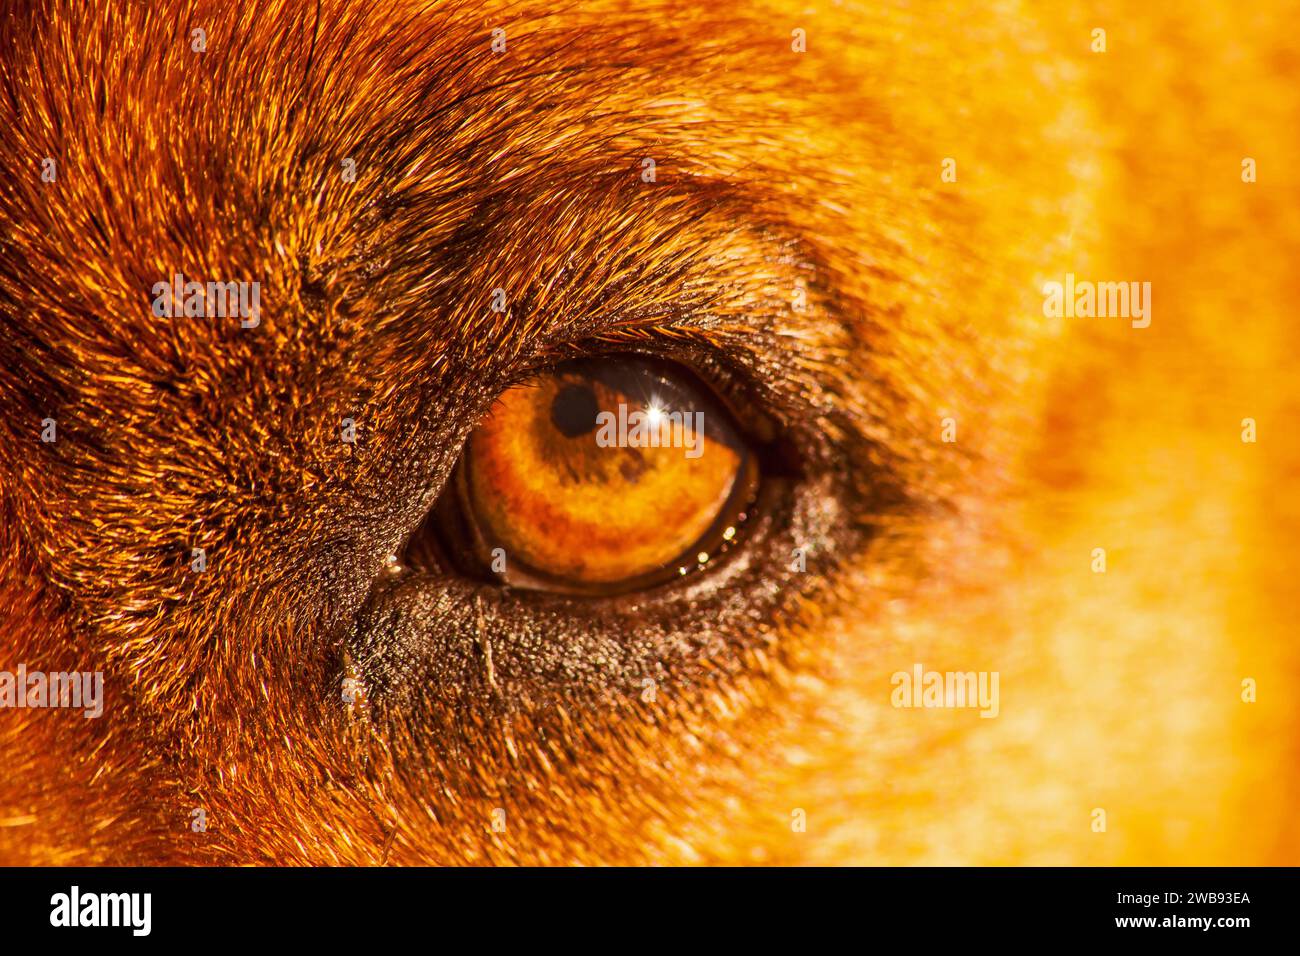 In the eye of the Boerboel 15452 Stock Photo